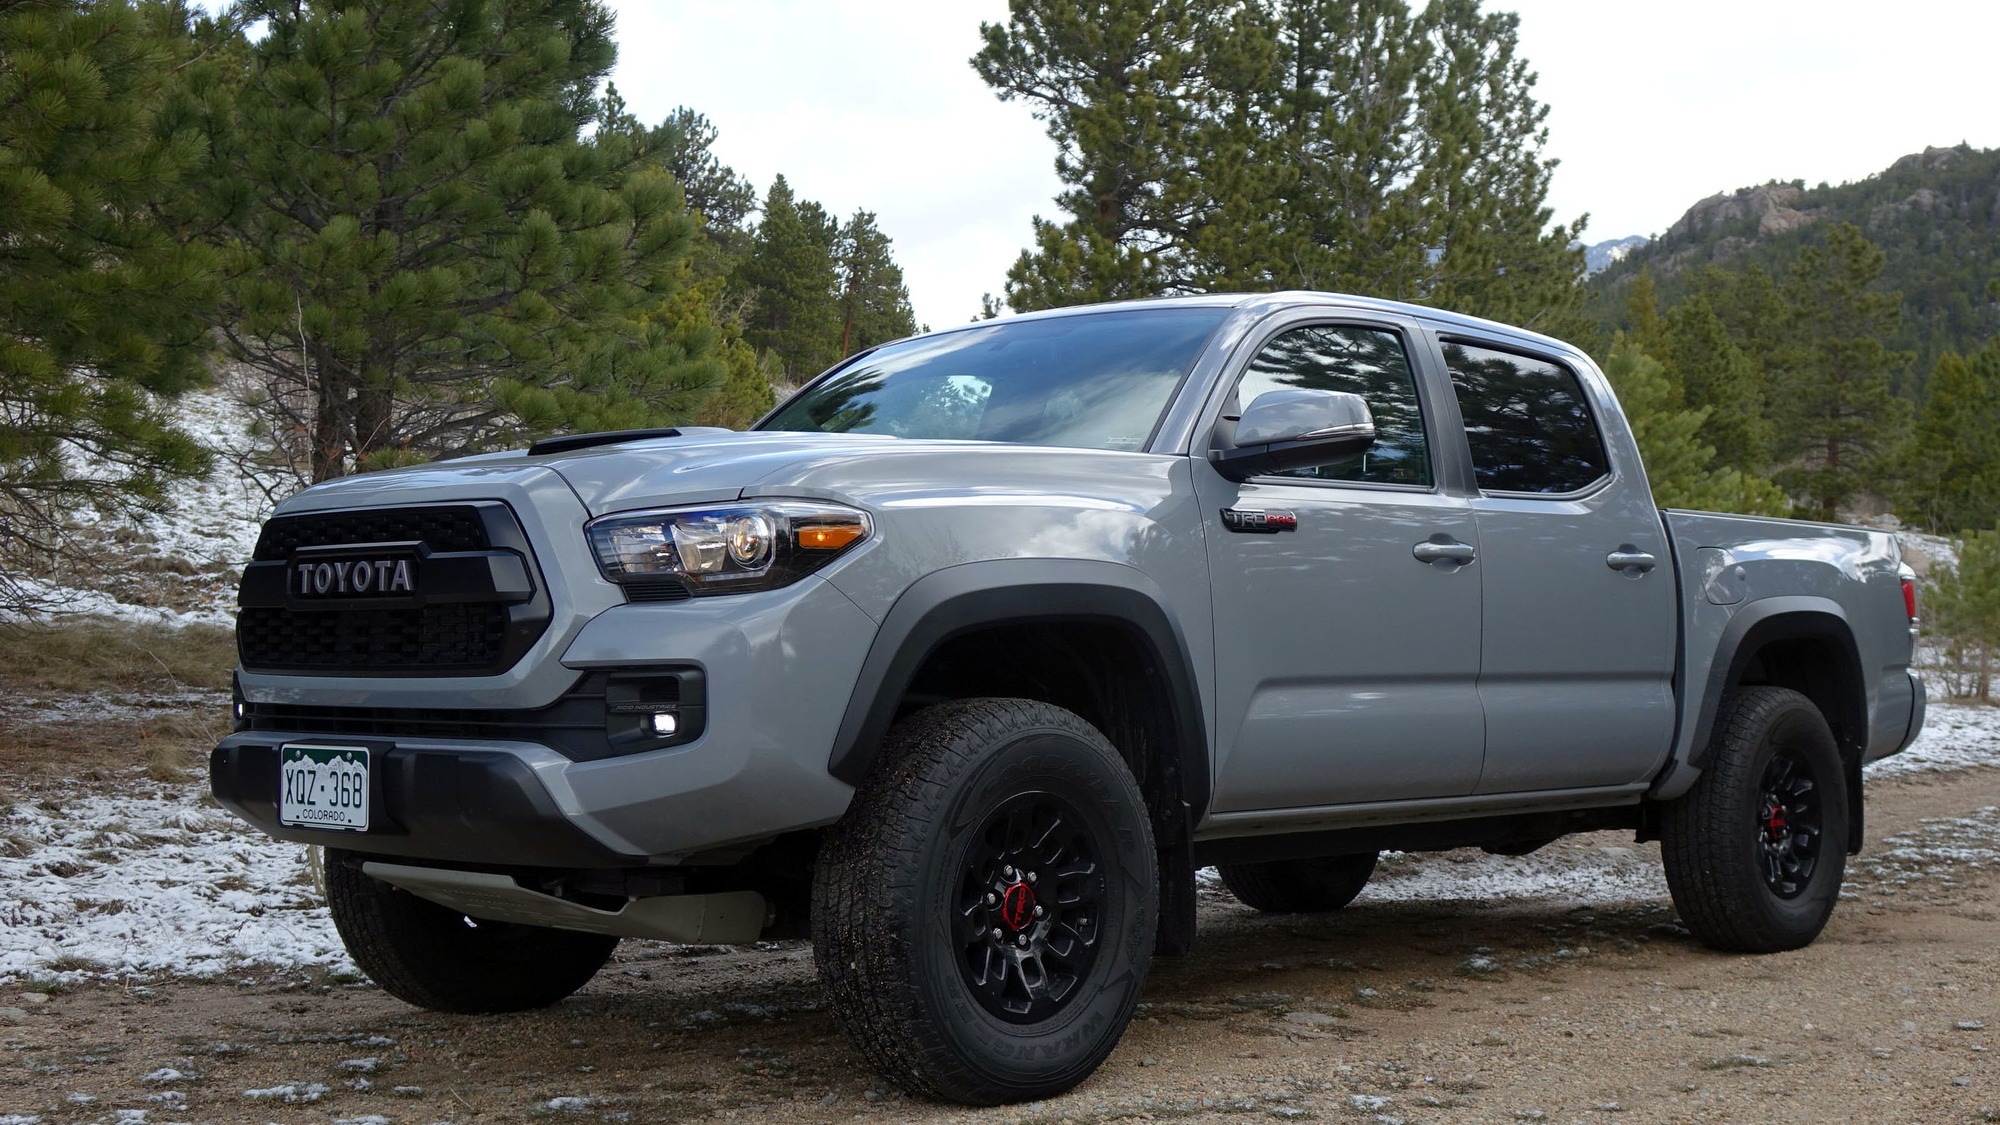 2017 Toyota TRD Pro first drive review the everyman's Raptor